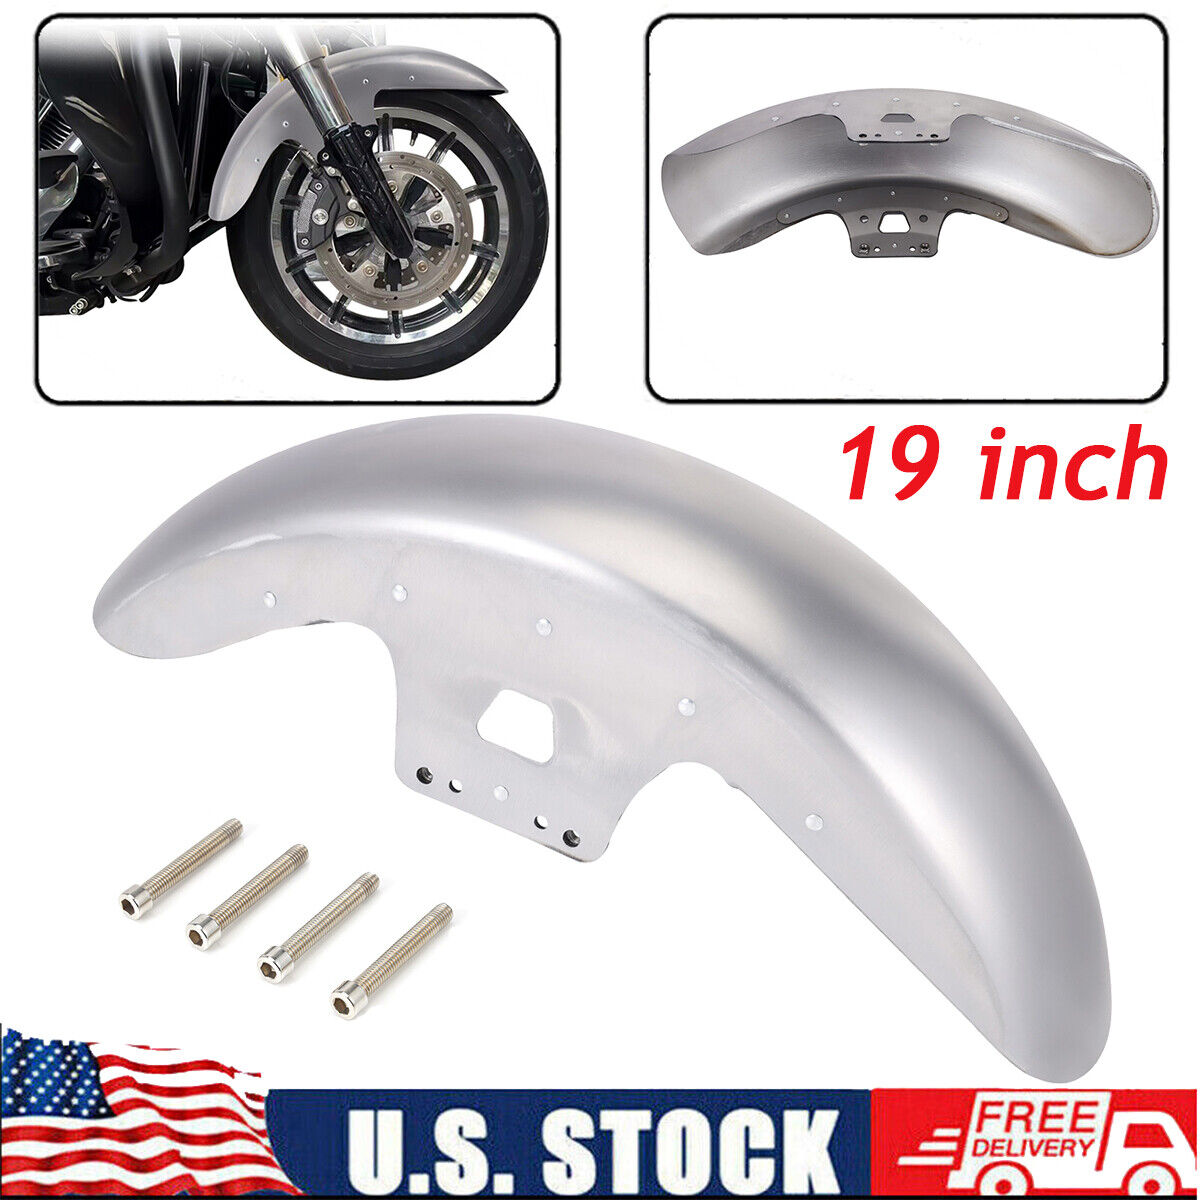 19 inch Unpainted Front Fender Fit For Harley Touring Electra Glide FLHT Baggers